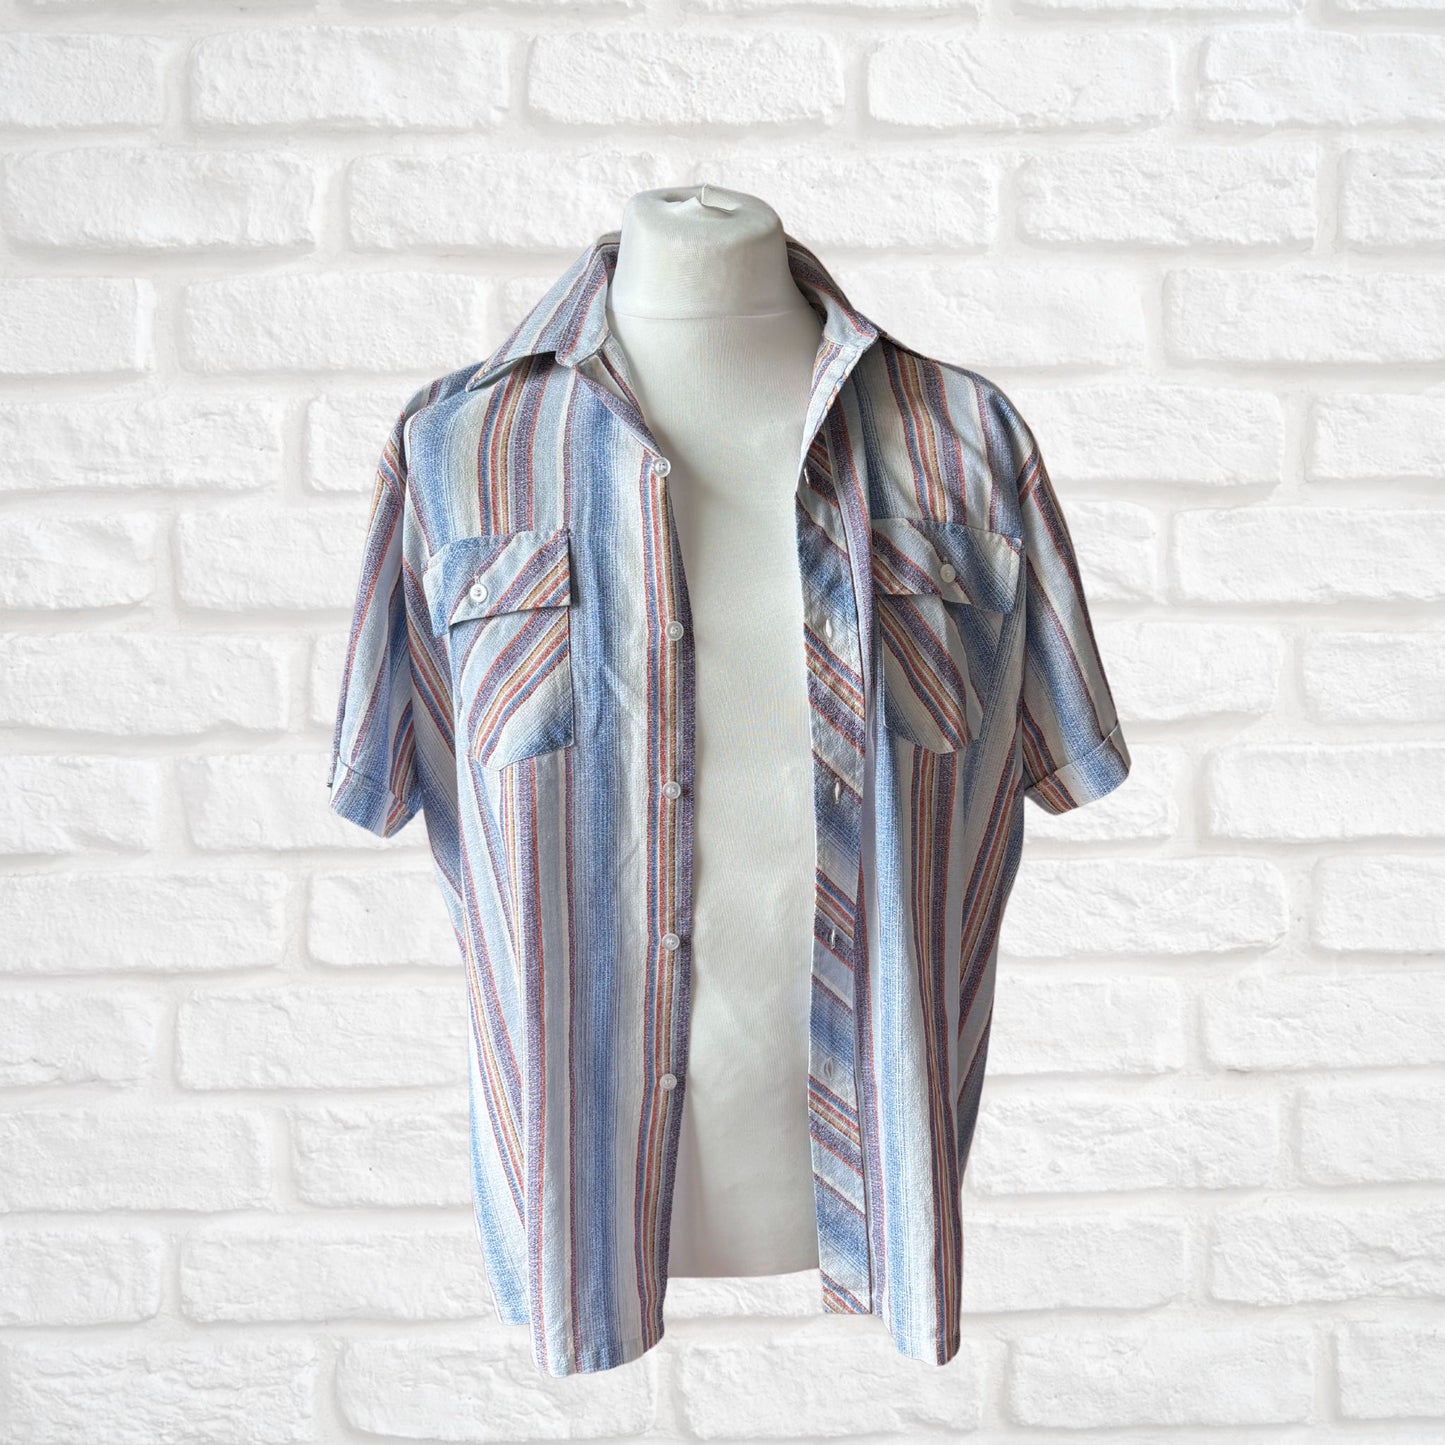 70s Vintage Striped Short Sleeved Shirt  - Classic Retro Style. Approx UK size L - XL (men) 20-22(women )